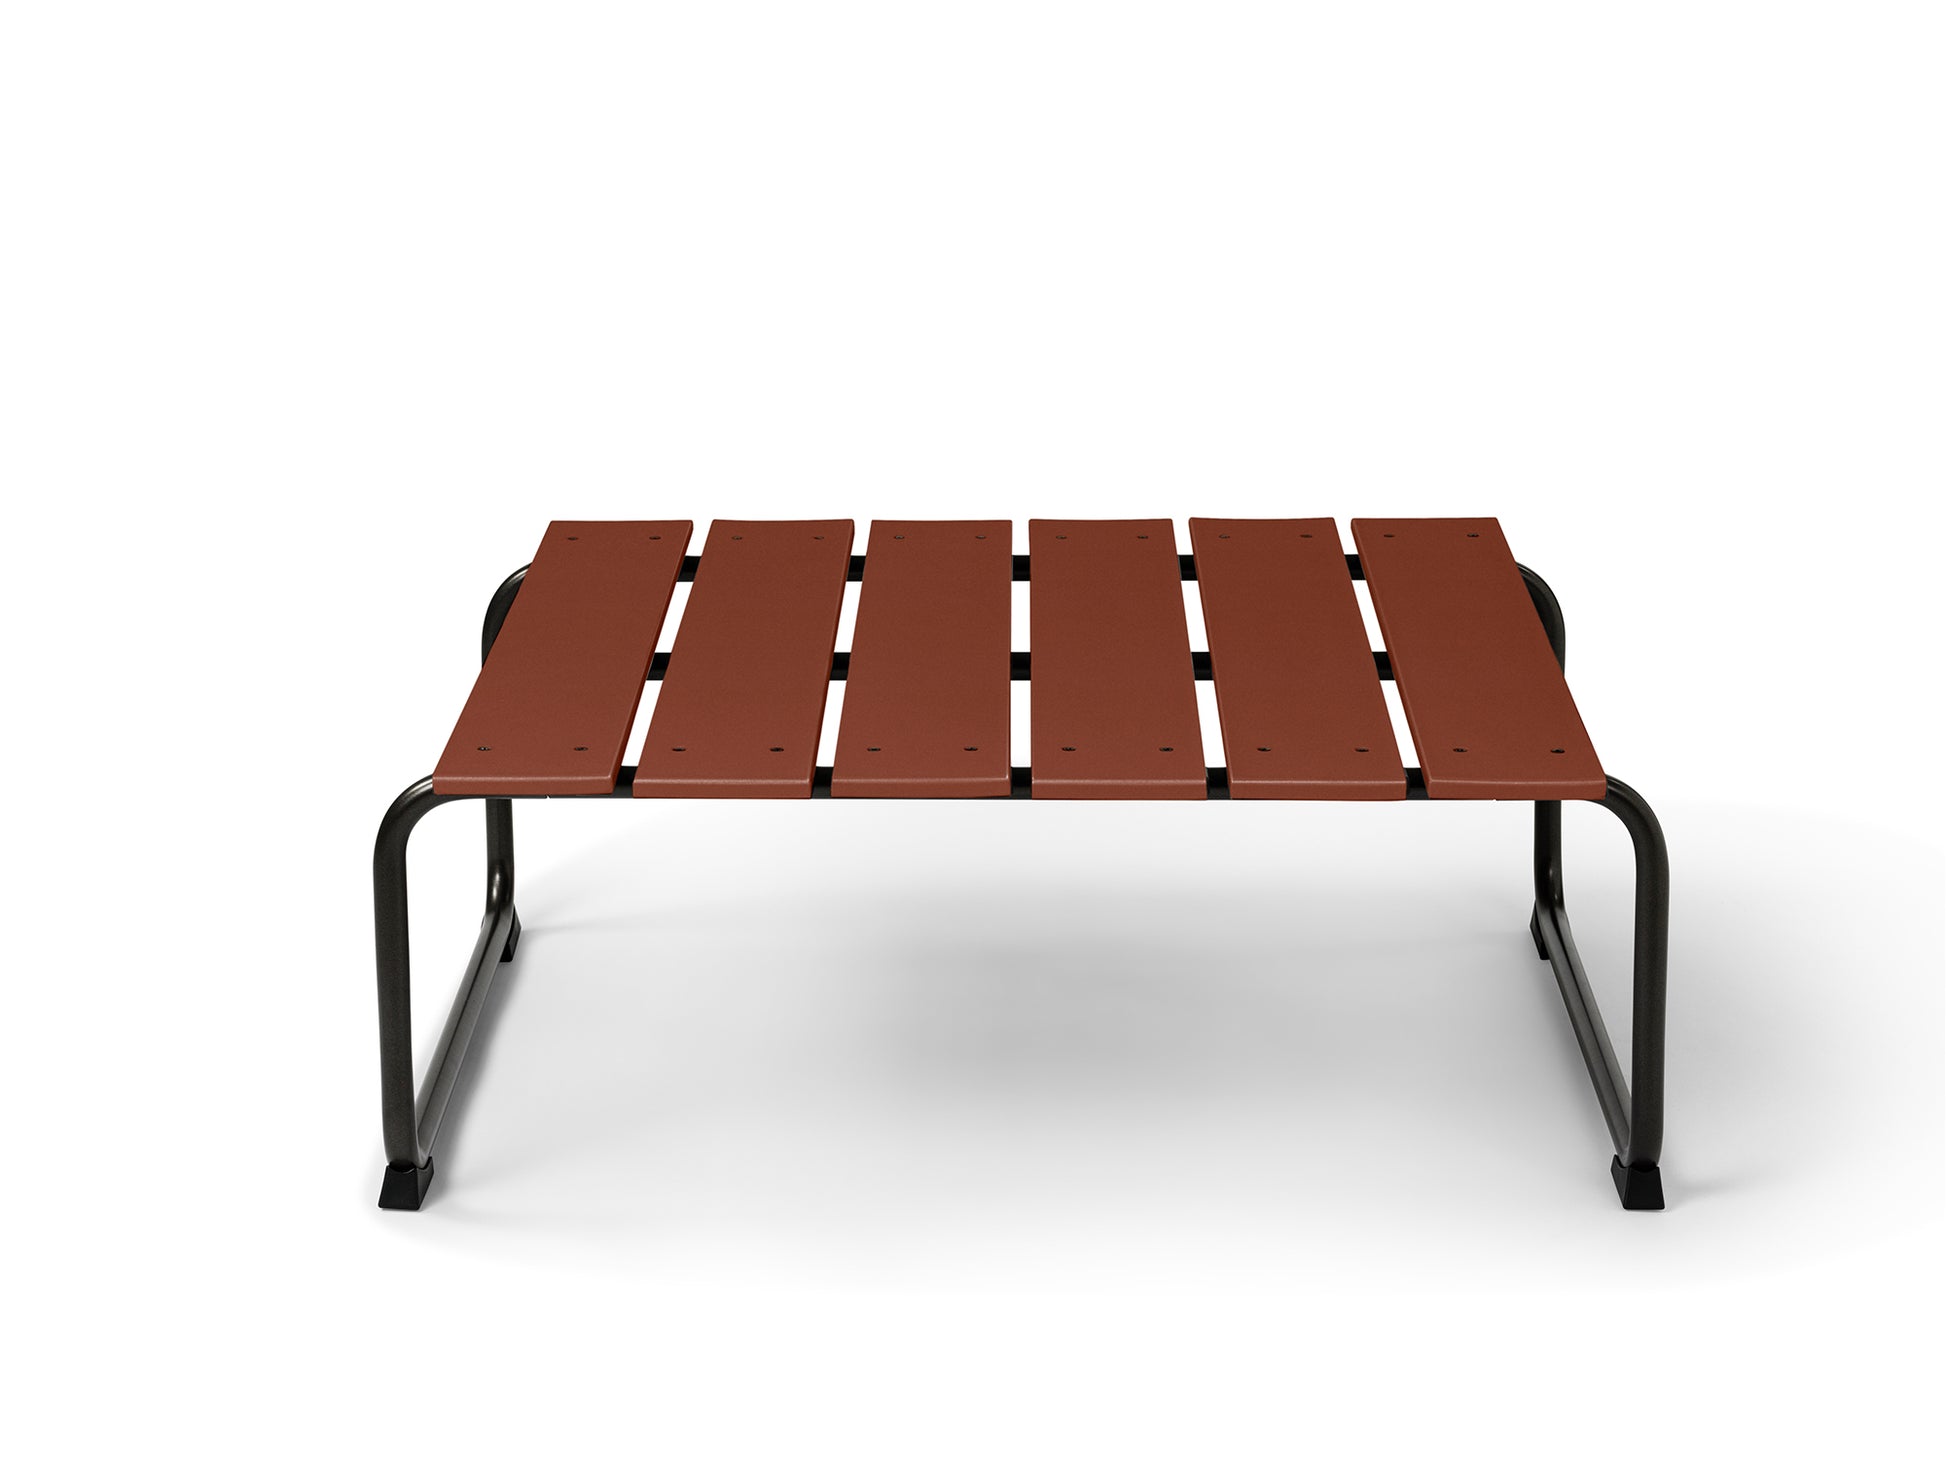 Ocean Lounge Table by Mater - Burnt Red